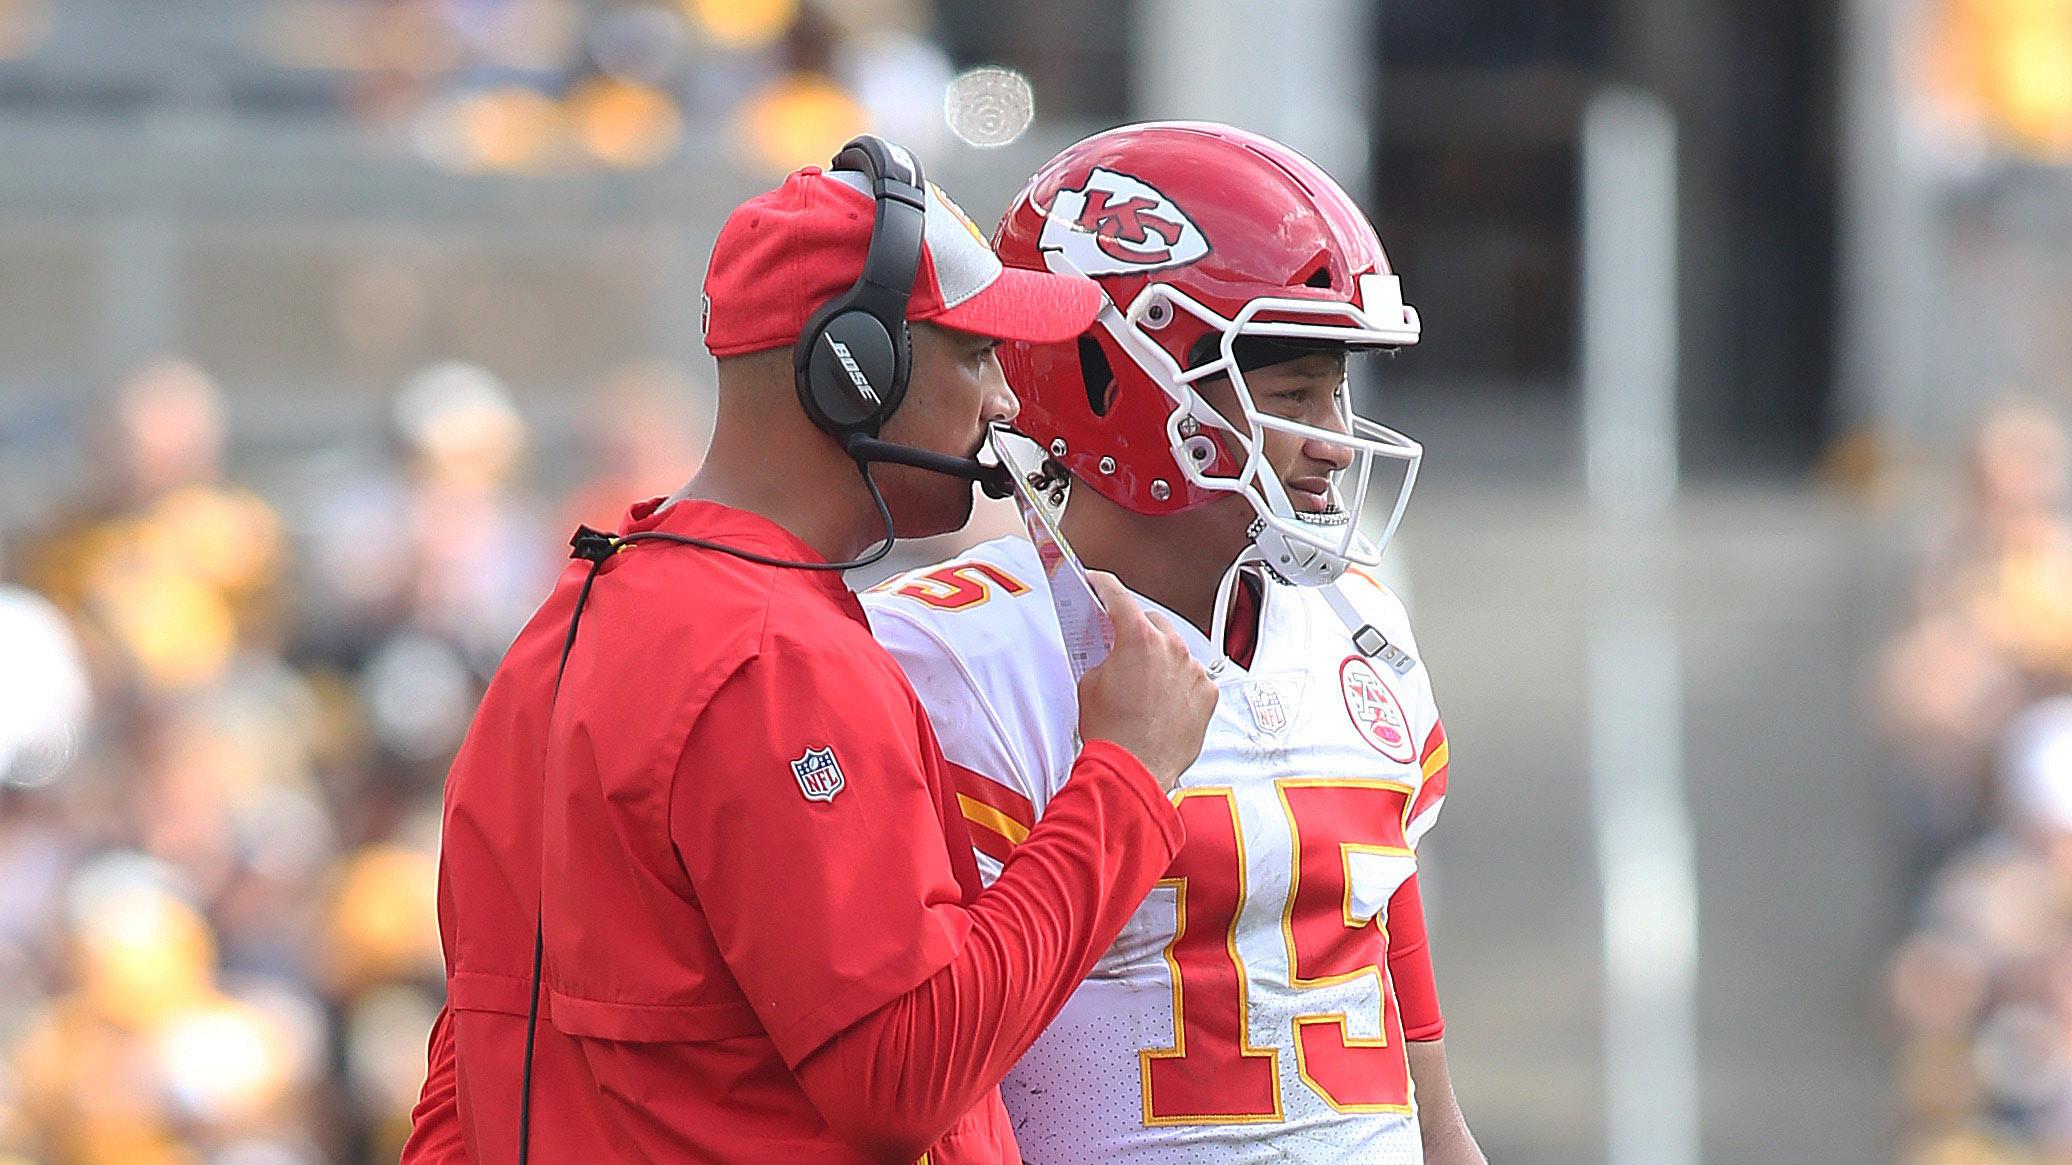 Kansas City Chiefs quarterbacks coach Mike Kafka (L) talks with quarterback Patrick Mahomes (15) against the Pittsburgh Steelers during the third quarter at Heinz Field. The Chiefs won 42-37. / Charles LeClaire-USA TODAY Sports